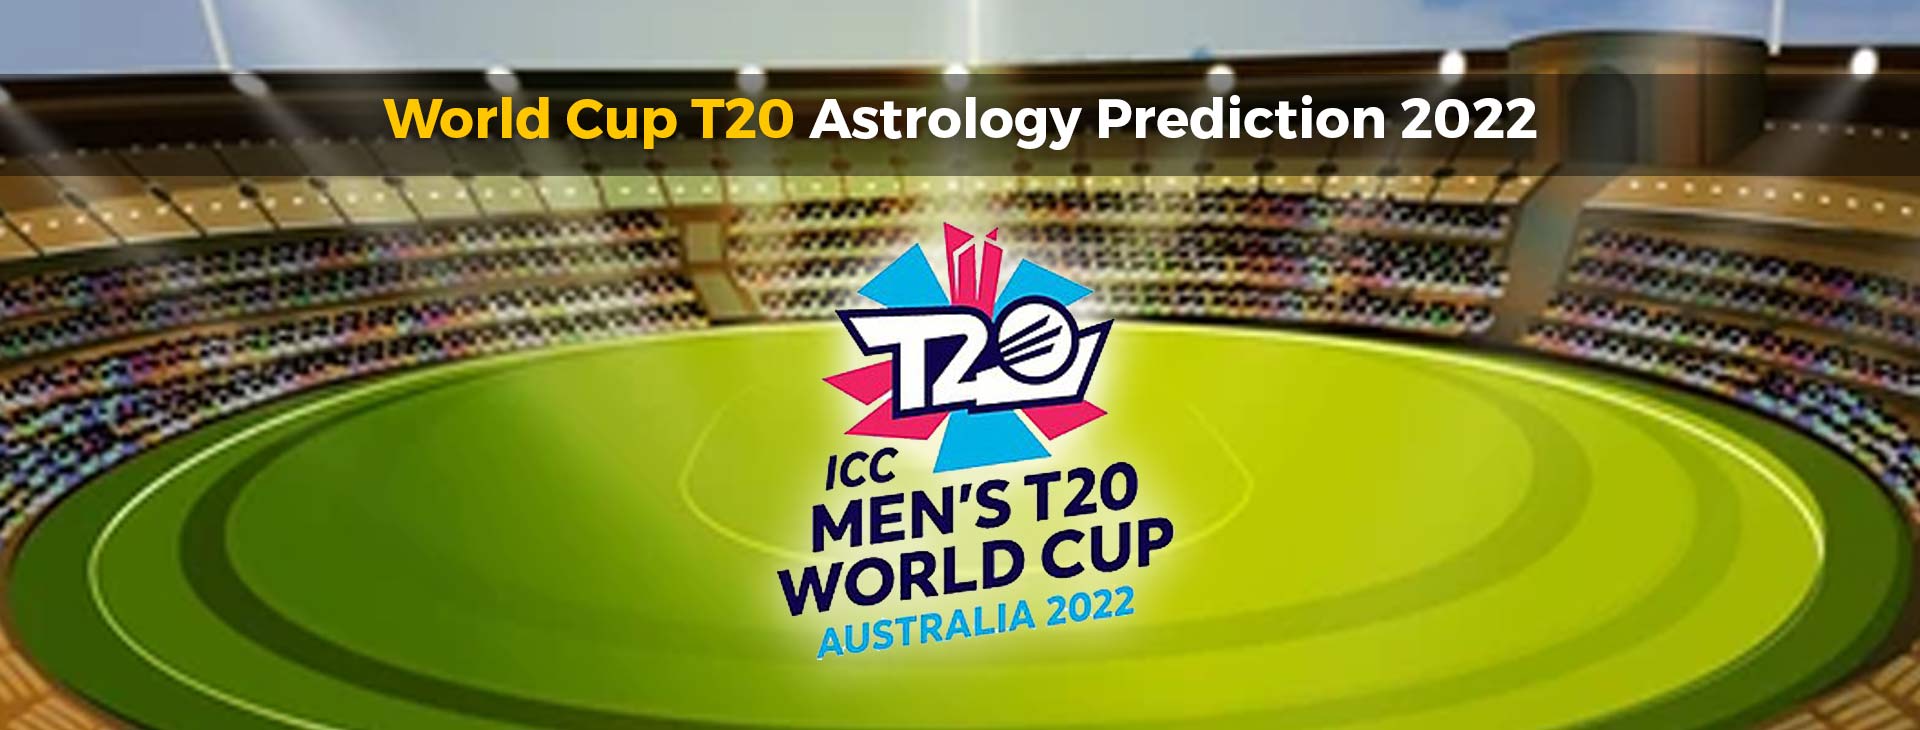 World Cup T20 Astrology Prediction 2022 CBTF Speed News